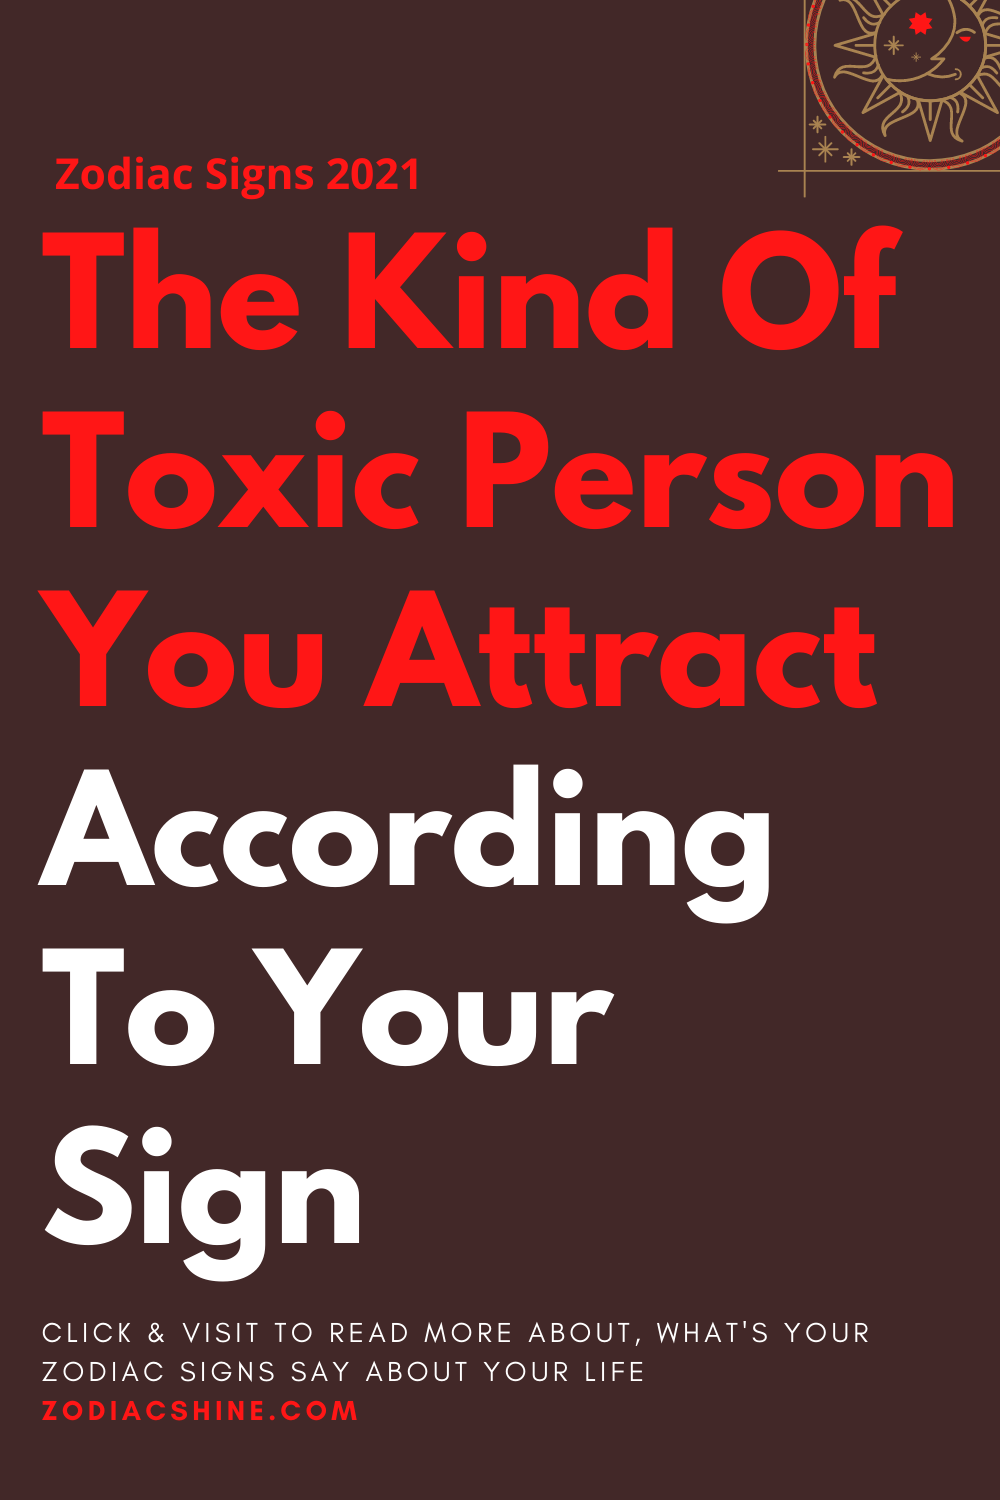 The Kind Of Toxic Person You Attract According To Your Sign